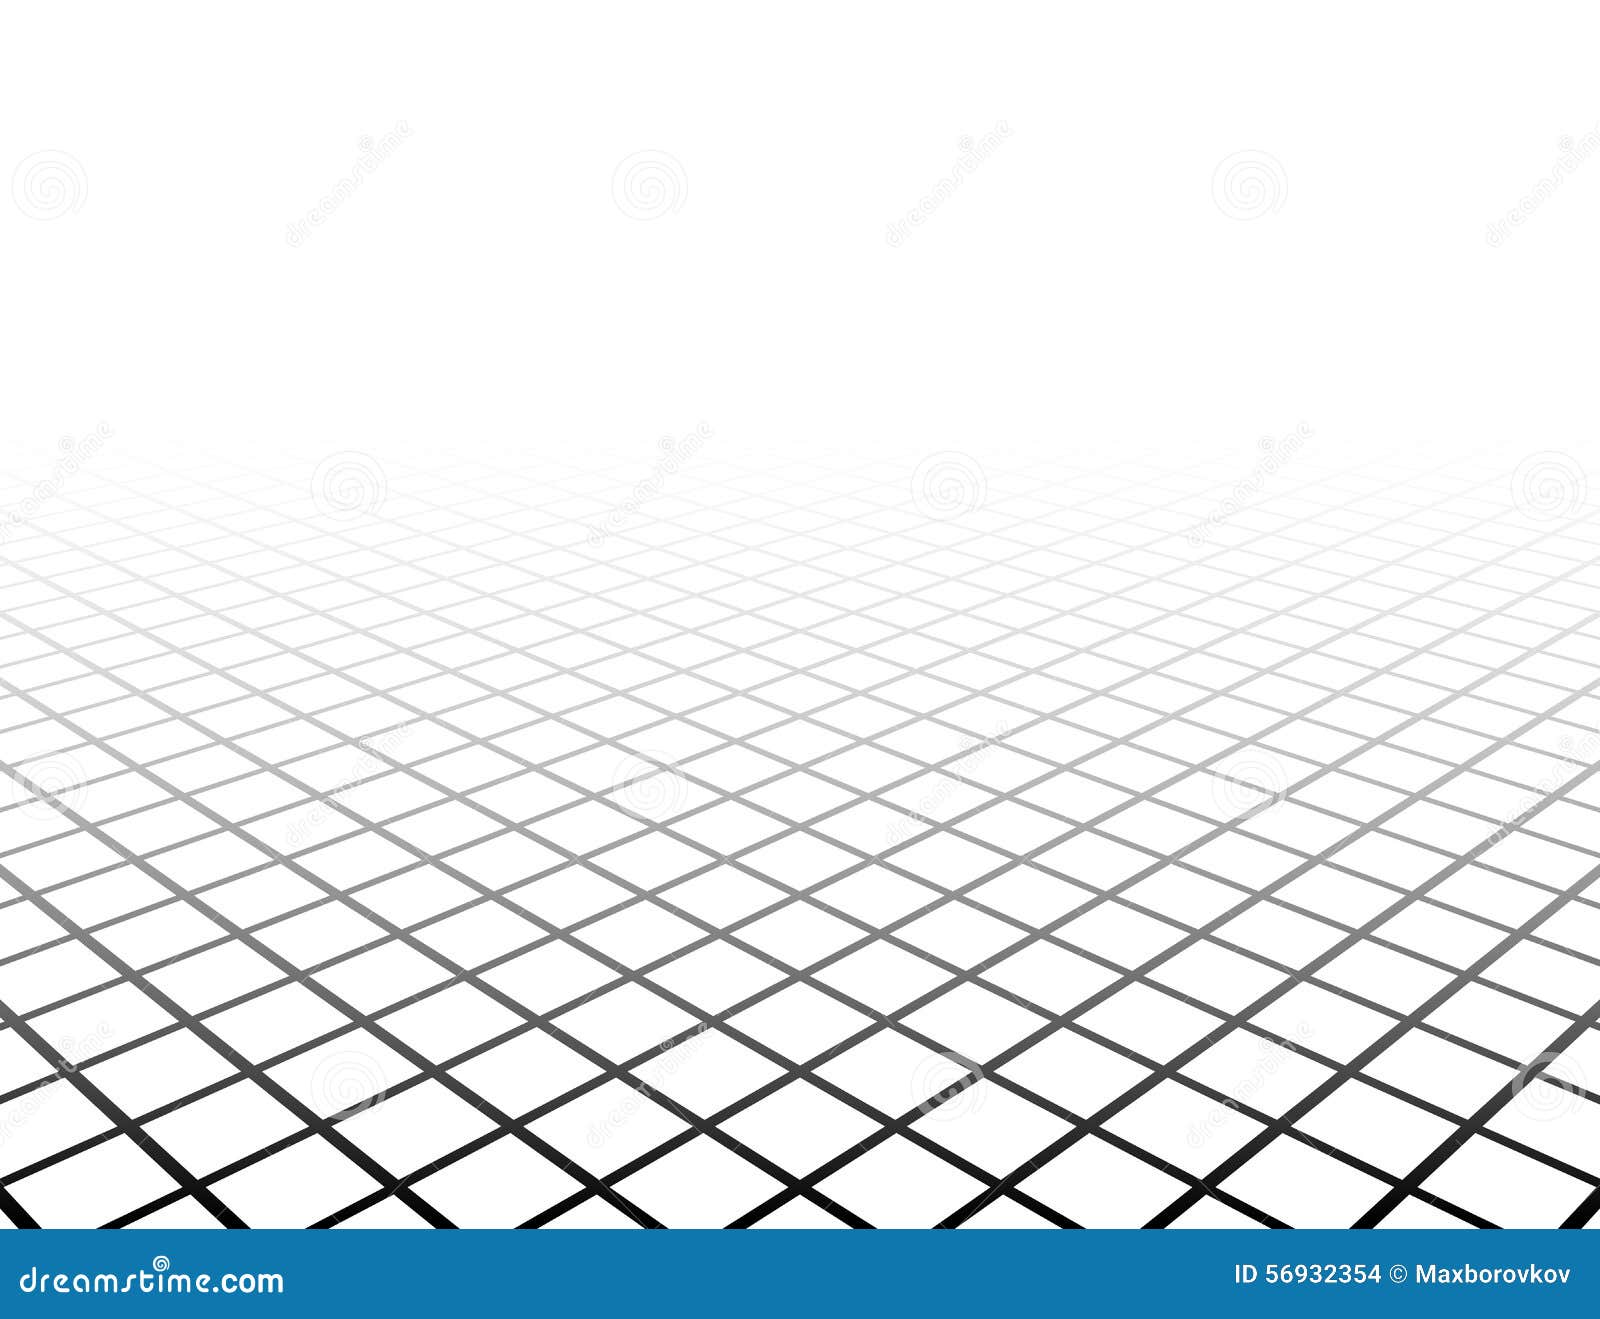 Perspective grid surface stock vector. Illustration of grid - 56932354